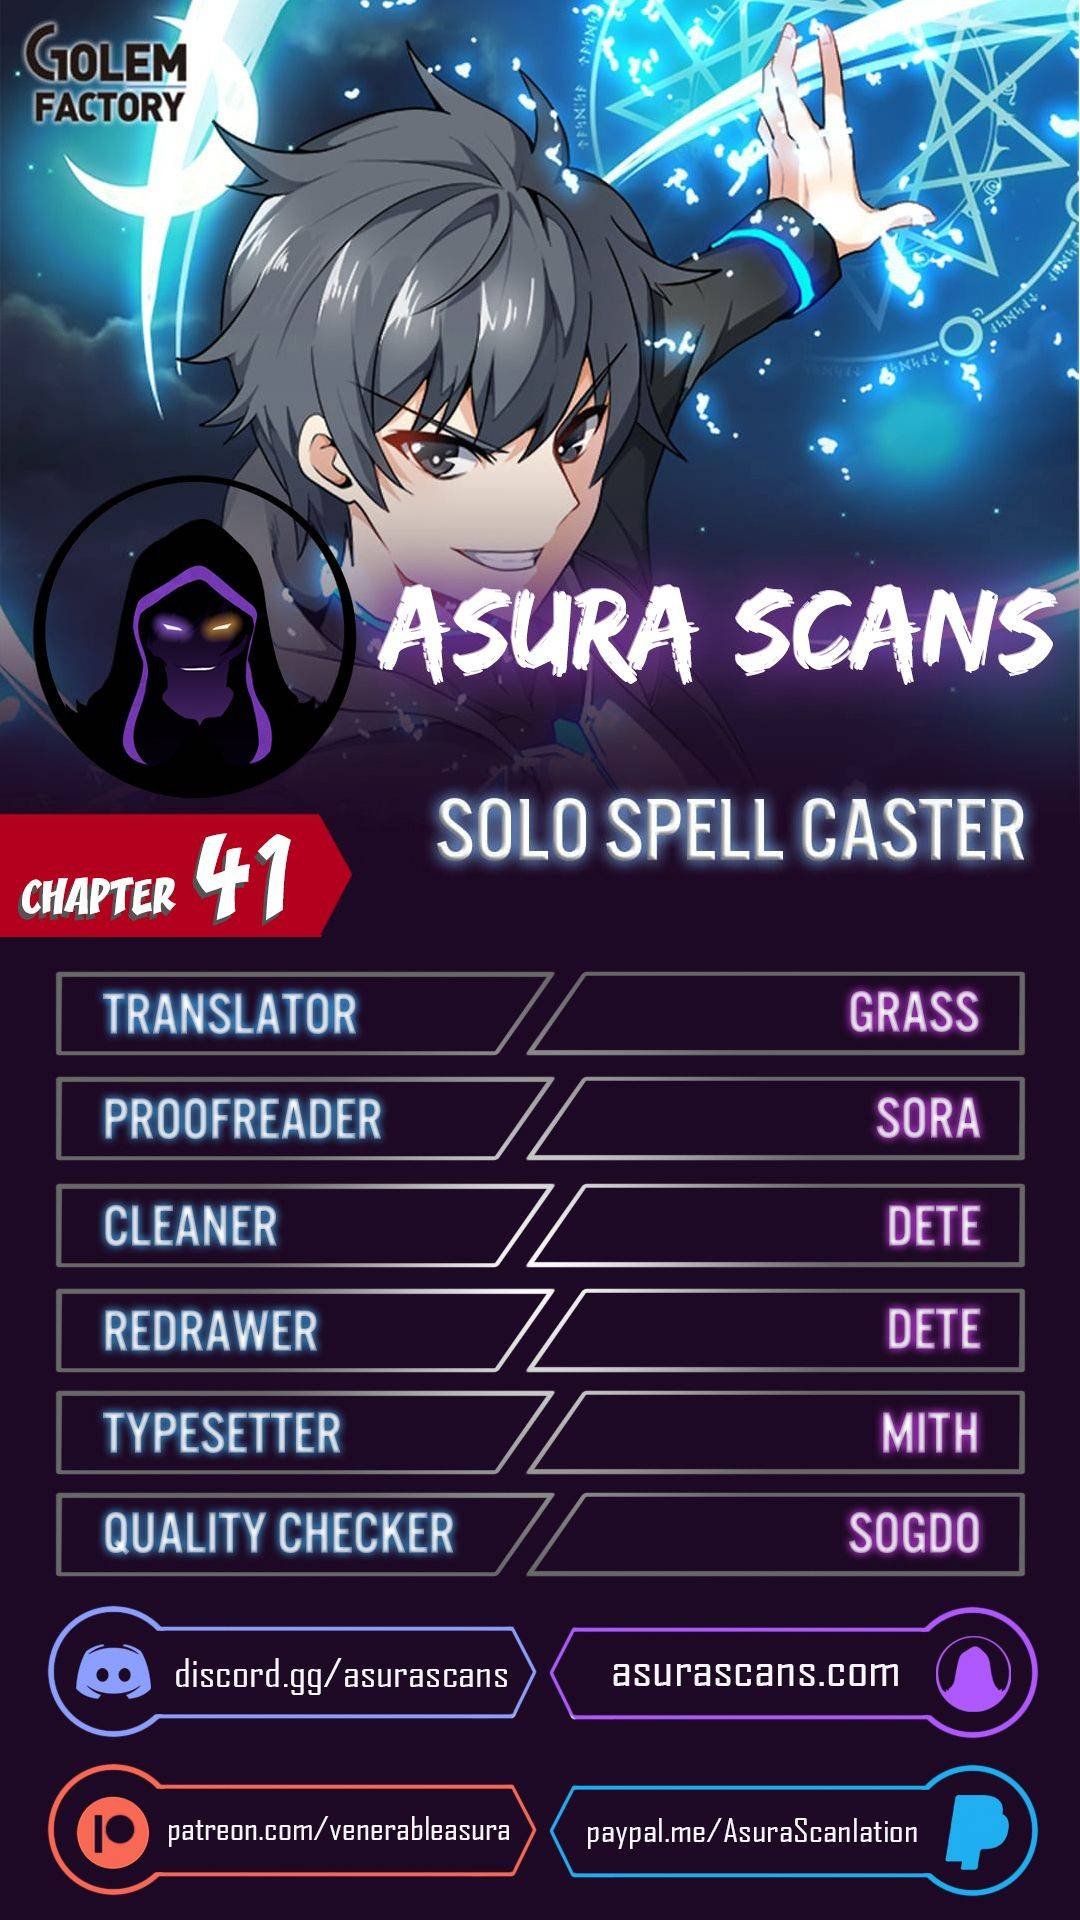 solo-spell-caster-chap-41-0